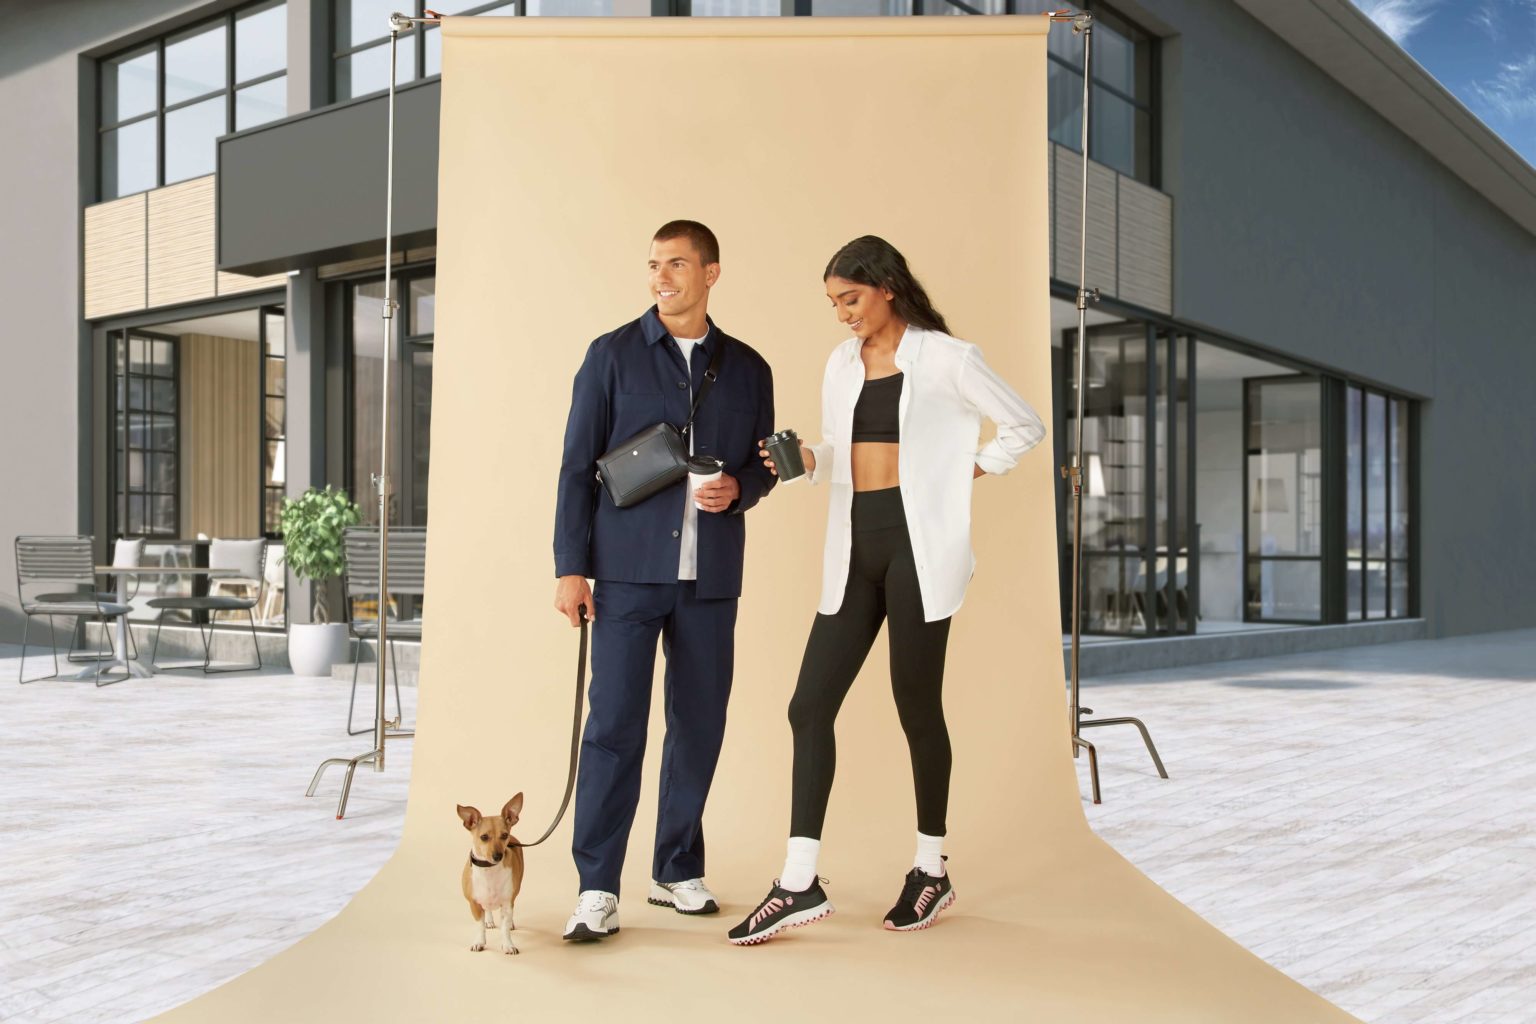 A male and female models in a leisure attire along with a small dog with them in a building background setup for photography